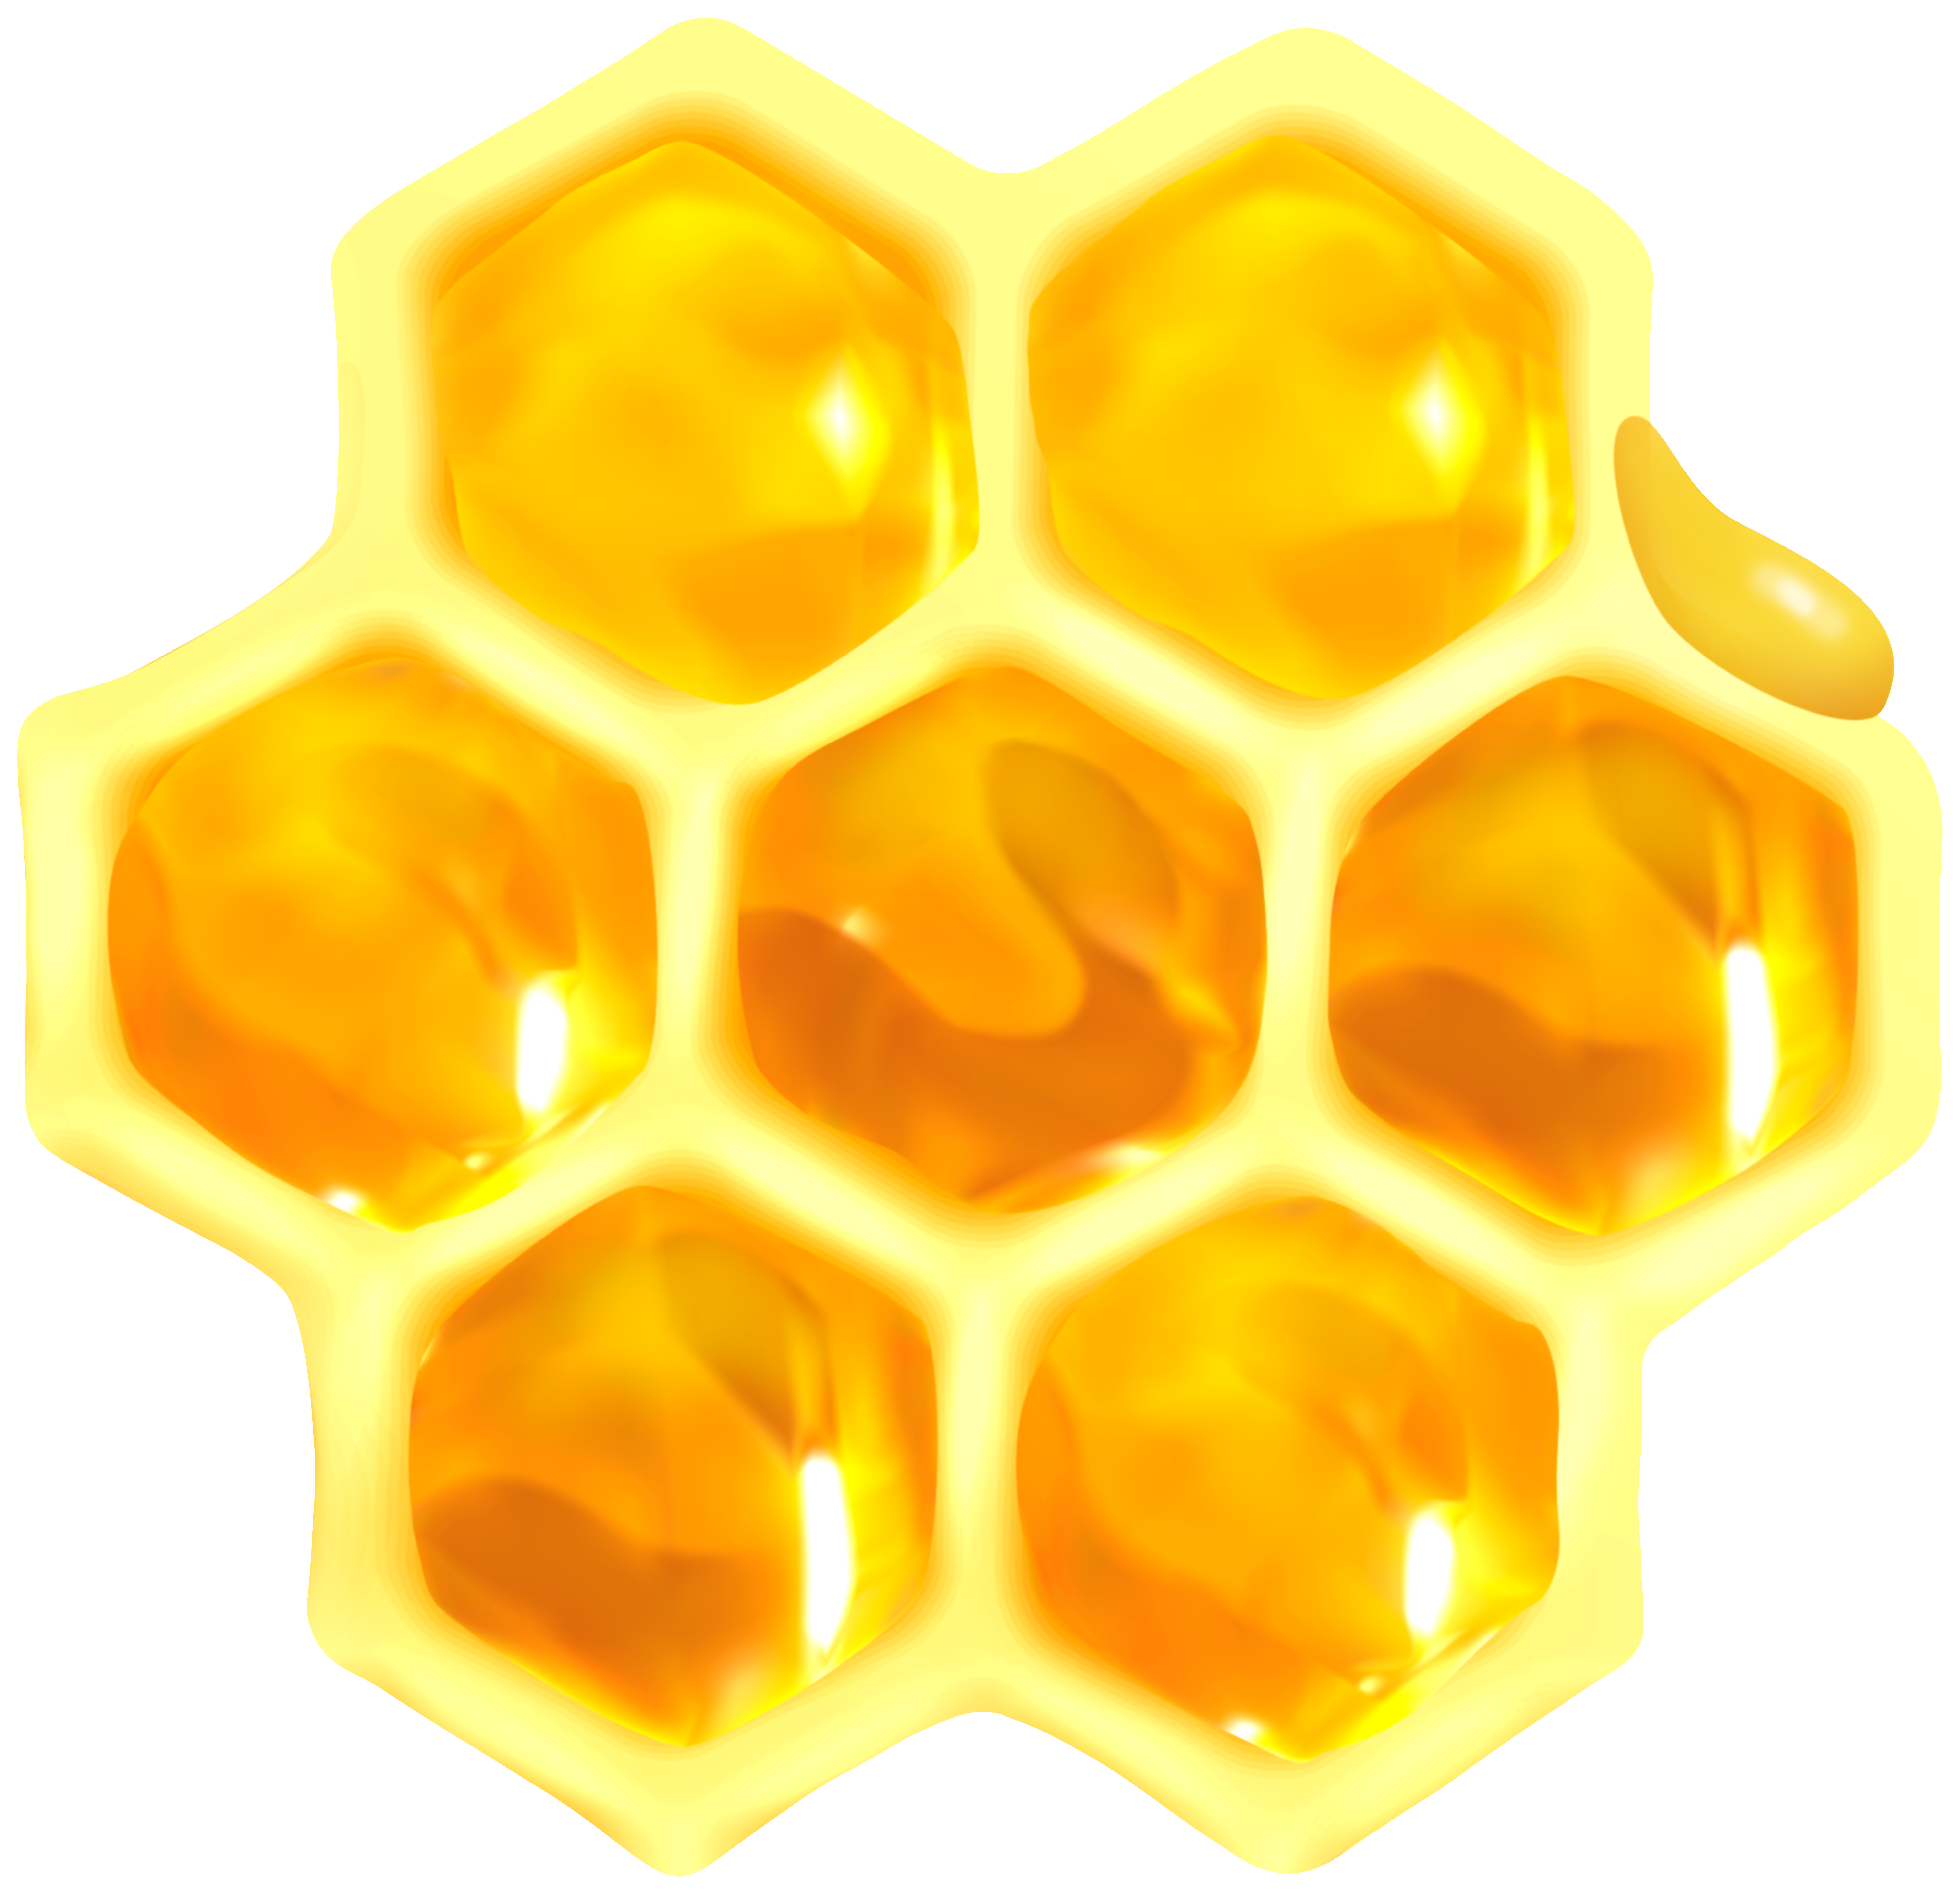 honeycomb-clipart #3122277 (License: Personal Use) .